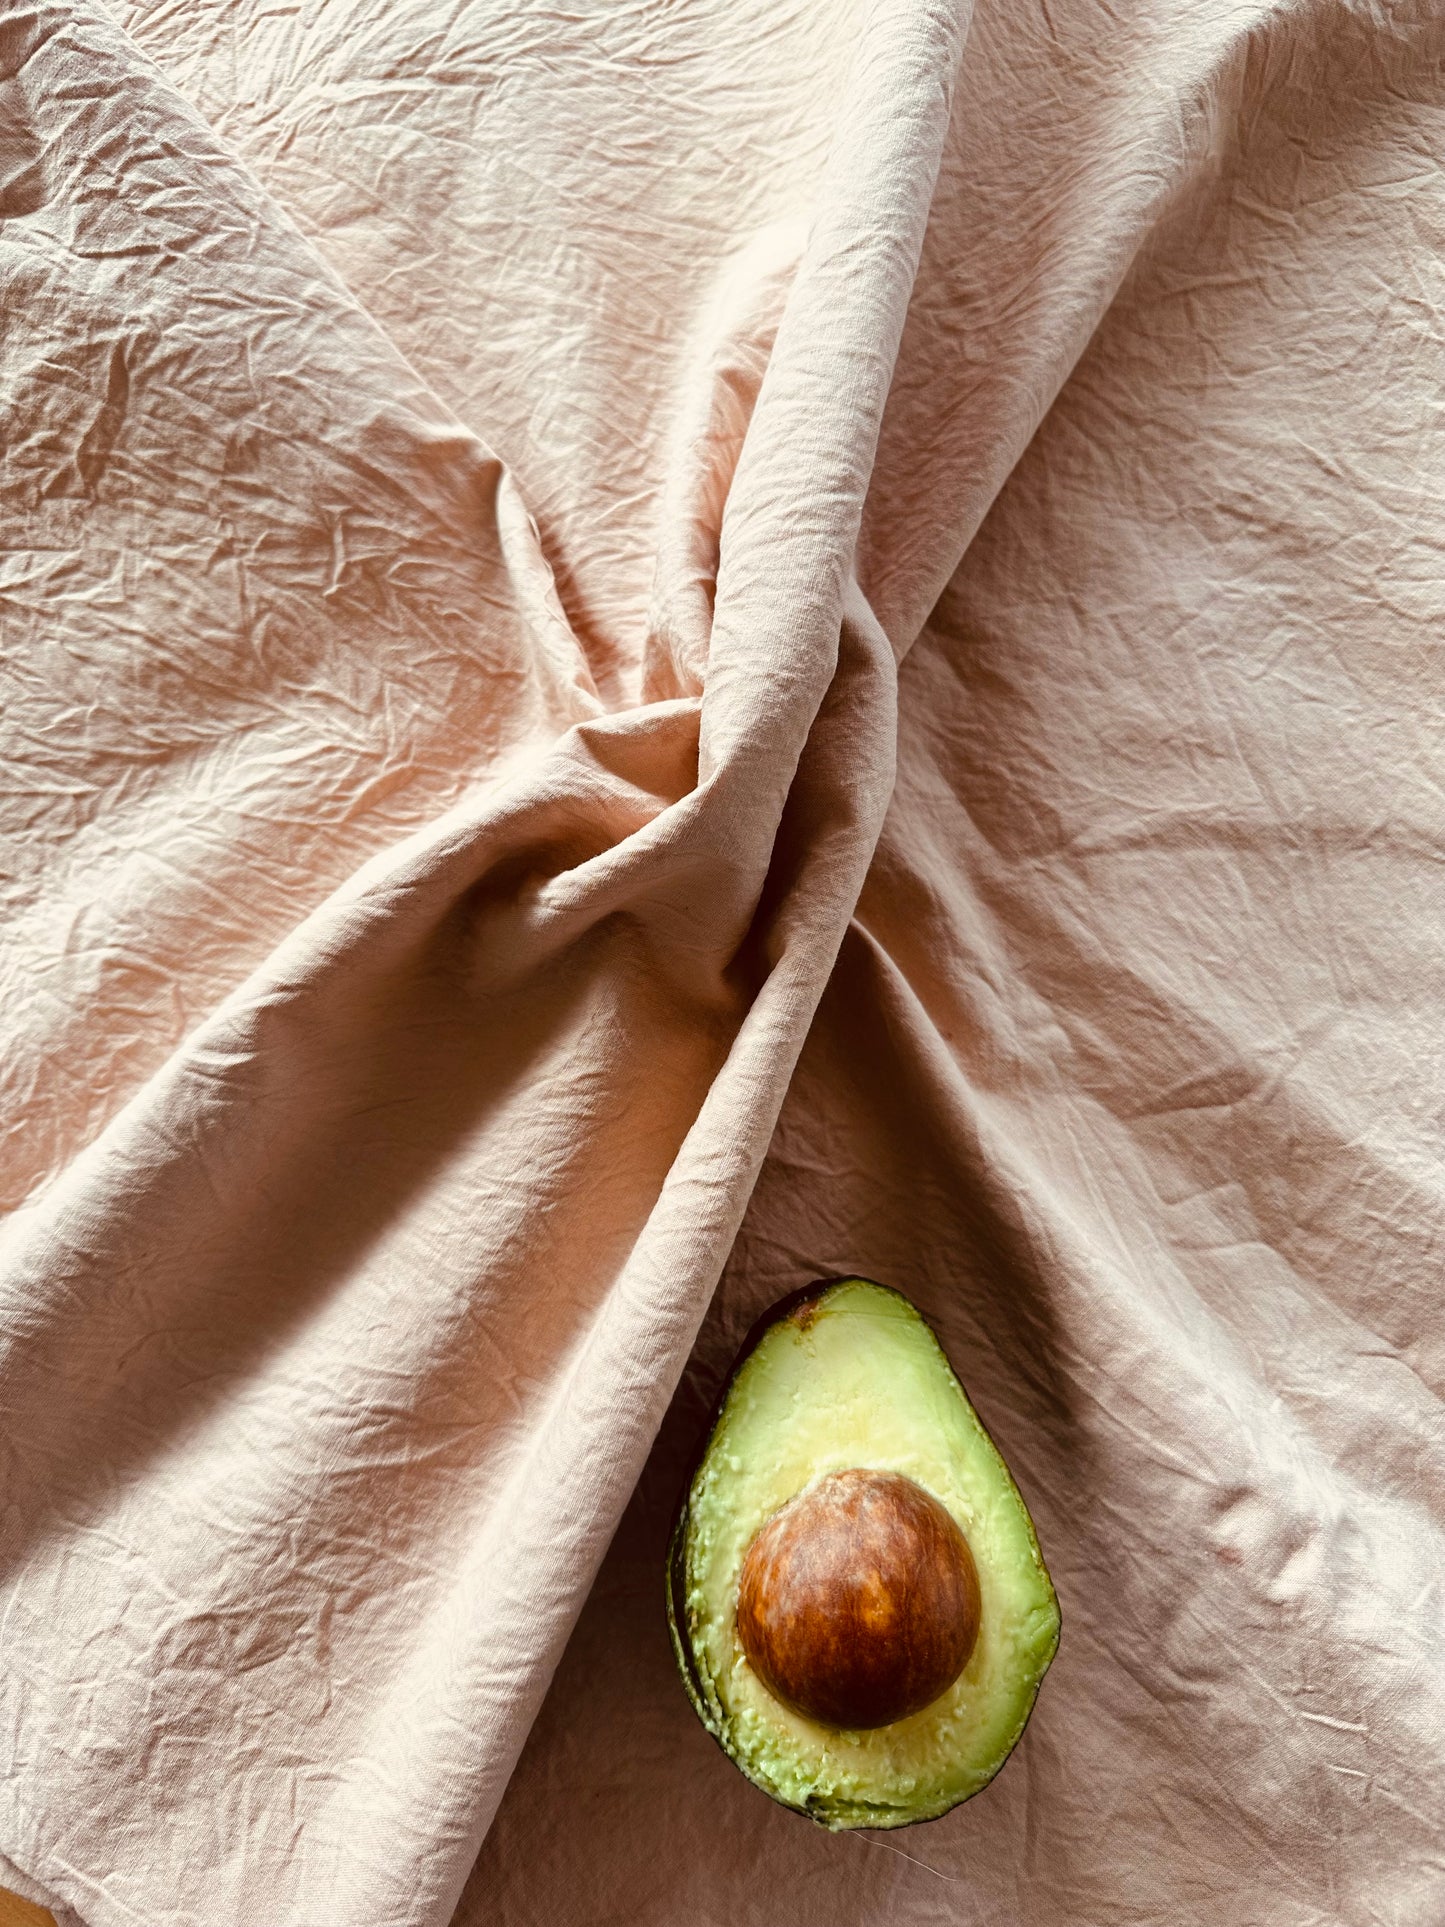 [Limited Edition] Naturally-dyed Cotton Fabrics Using Avocado